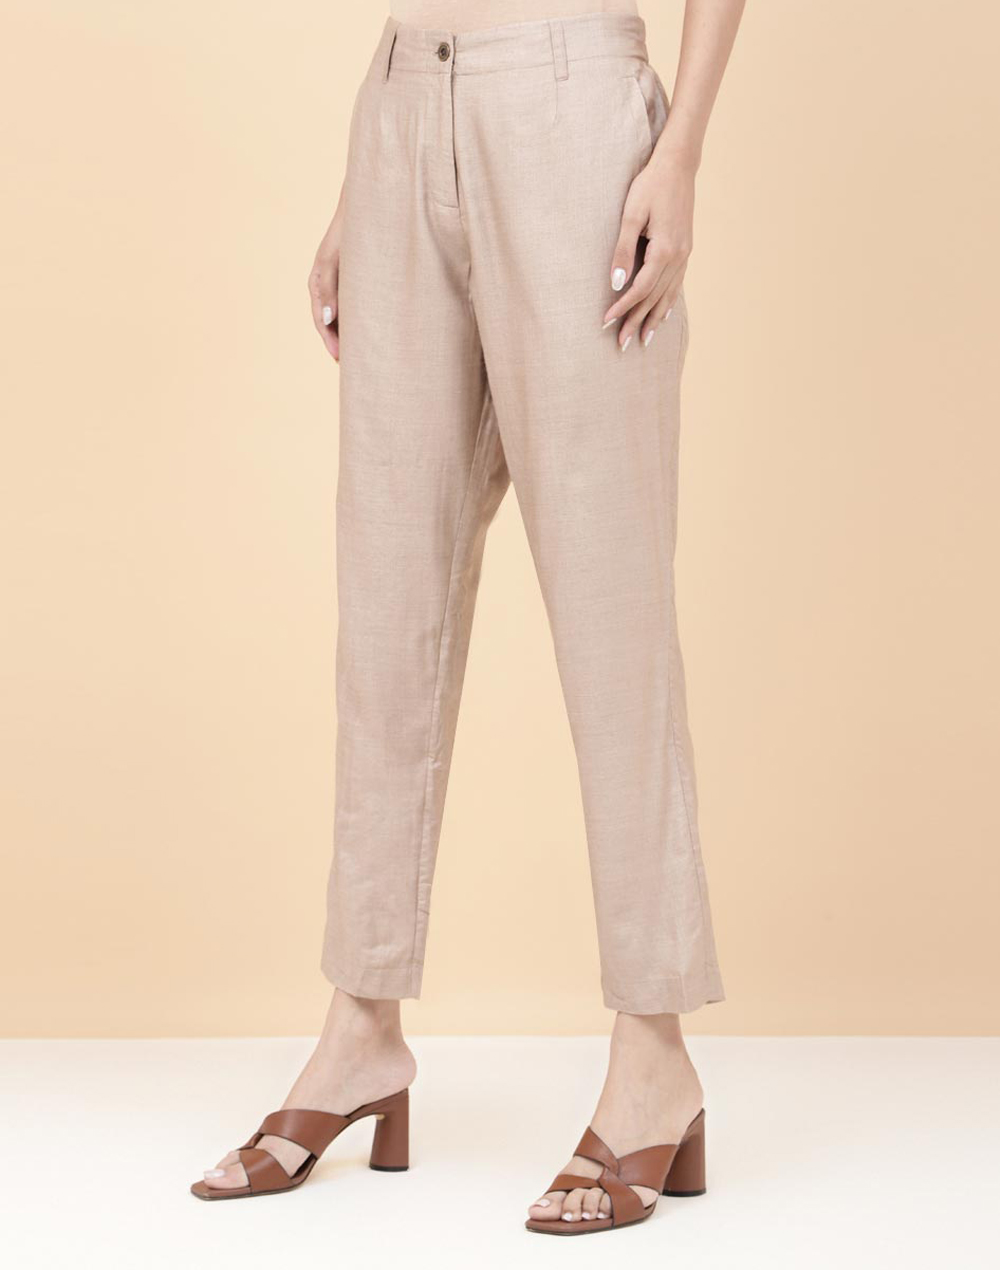 Formal Womens Trousers - Buy Formal Womens Trousers Online at Best Prices  In India